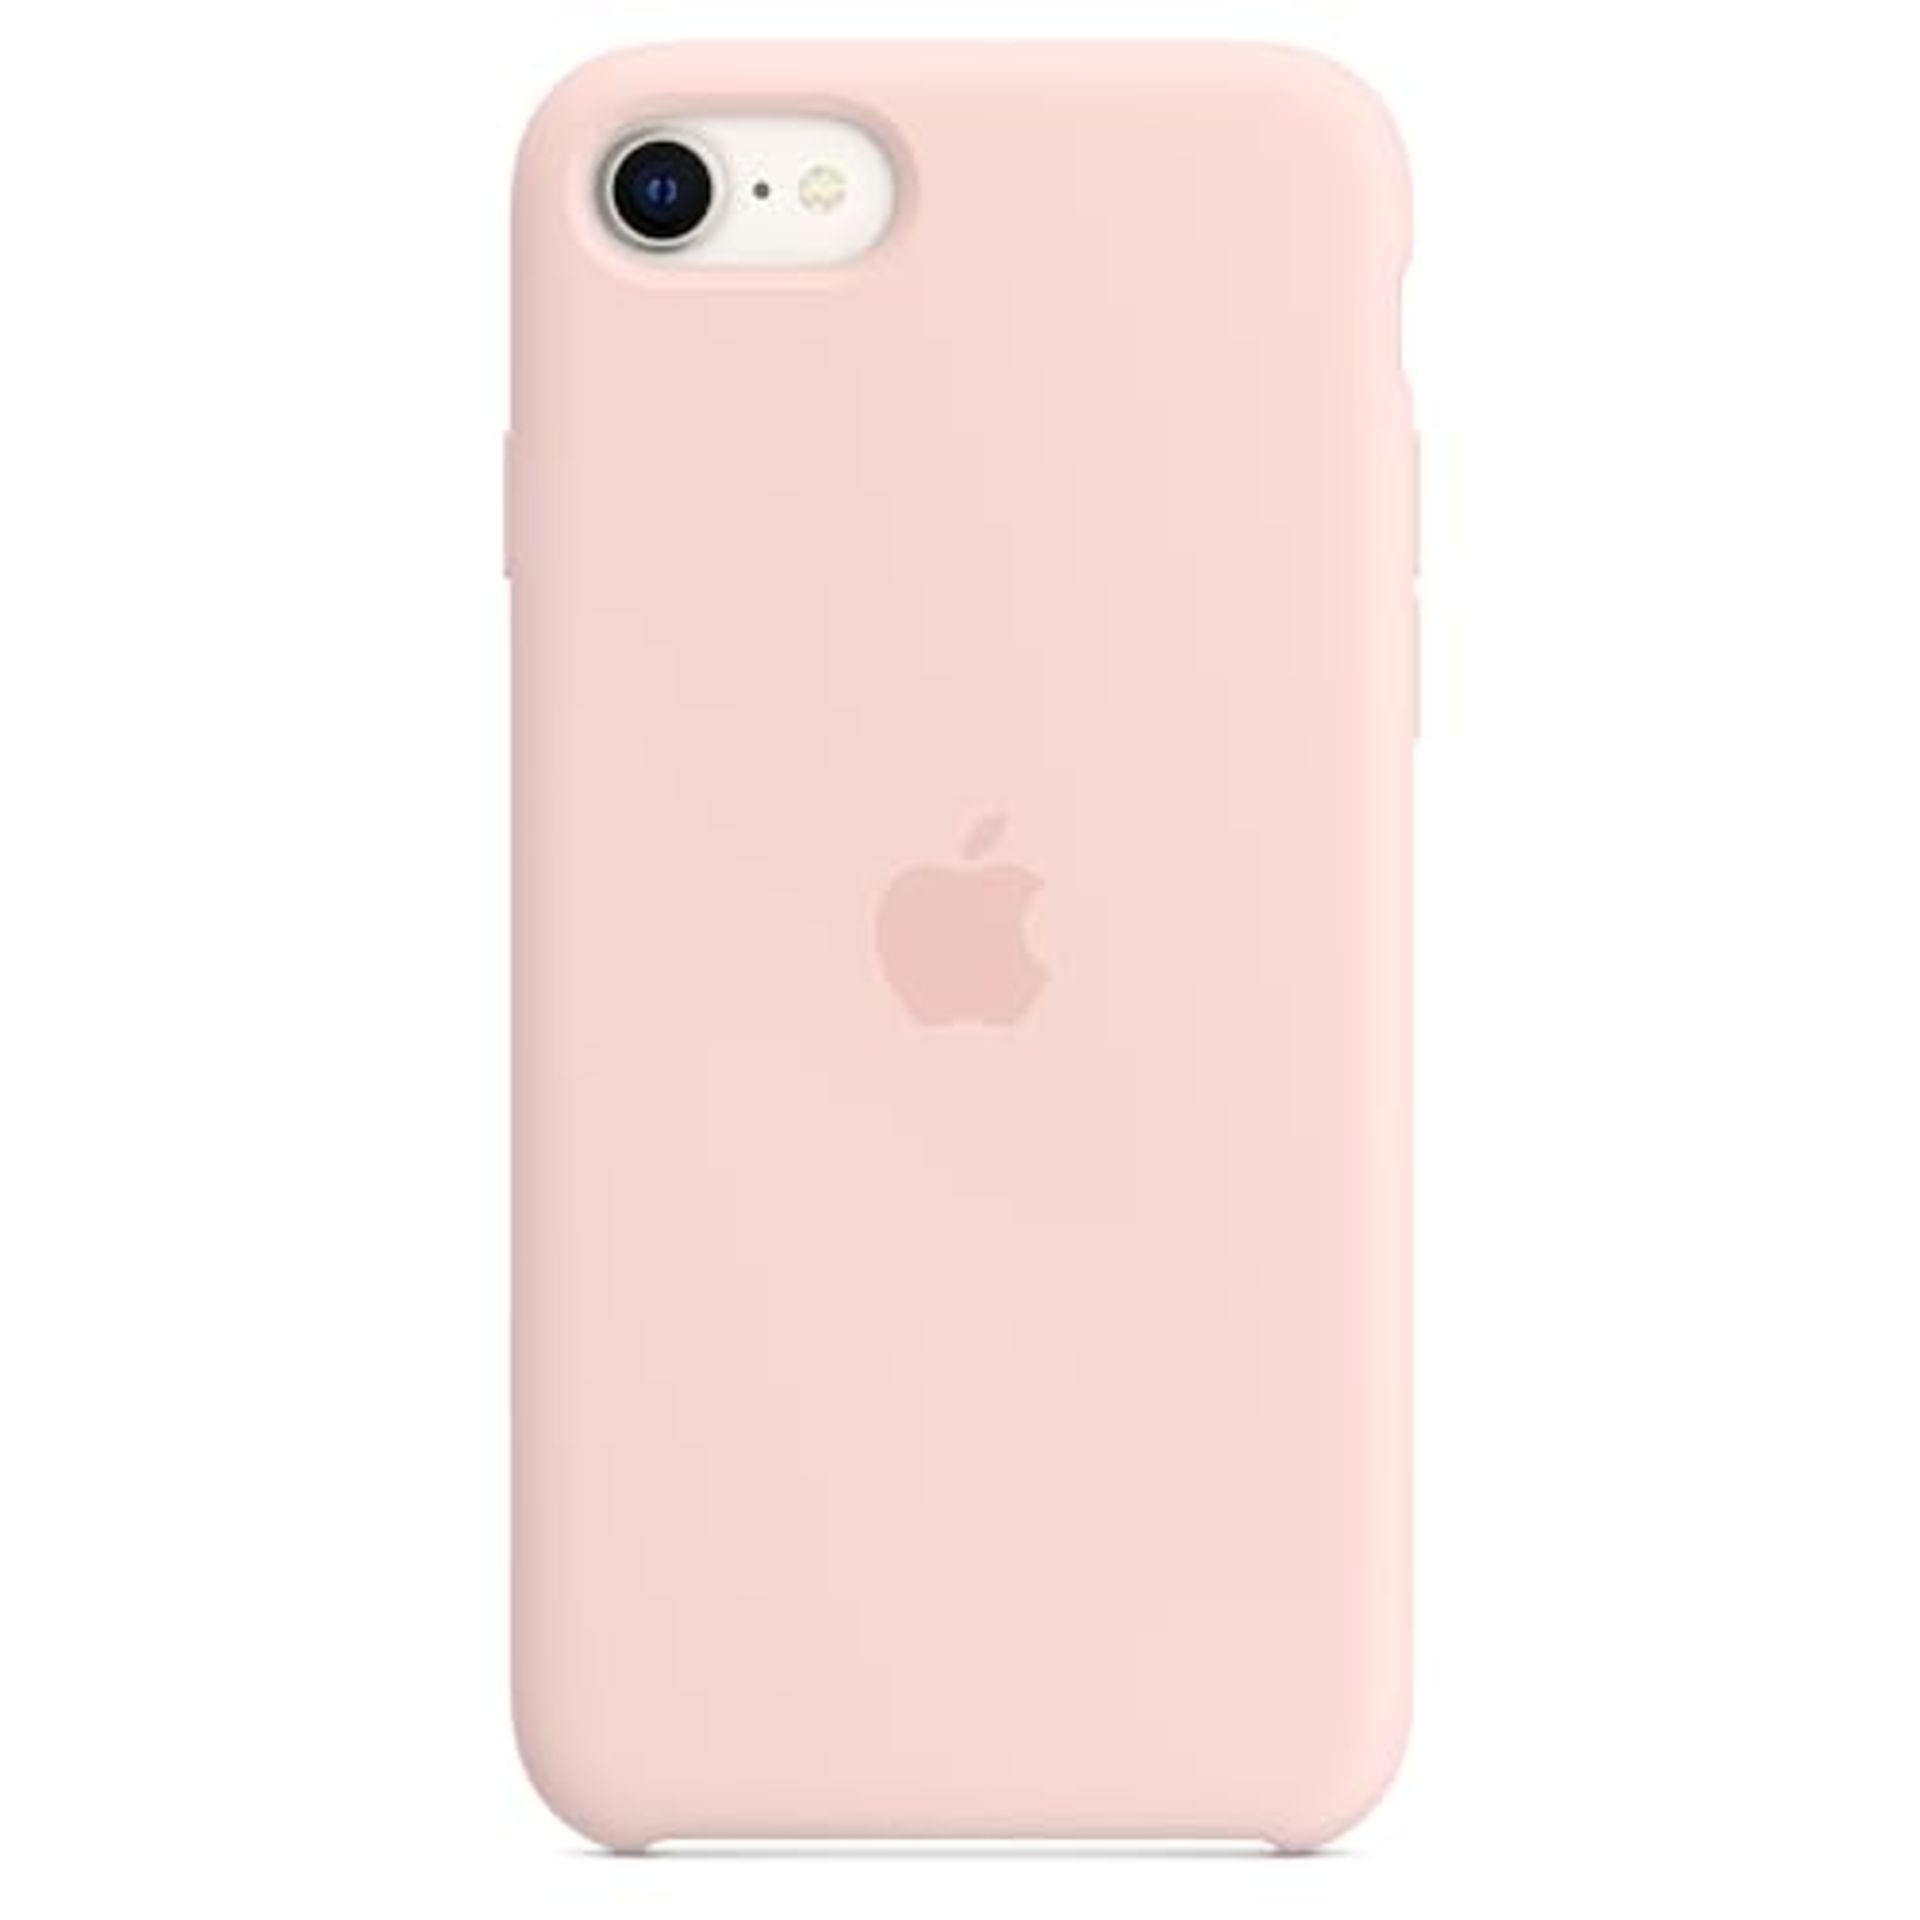 Apple Silicone Case (for iPhone SE) - Chalk Pink